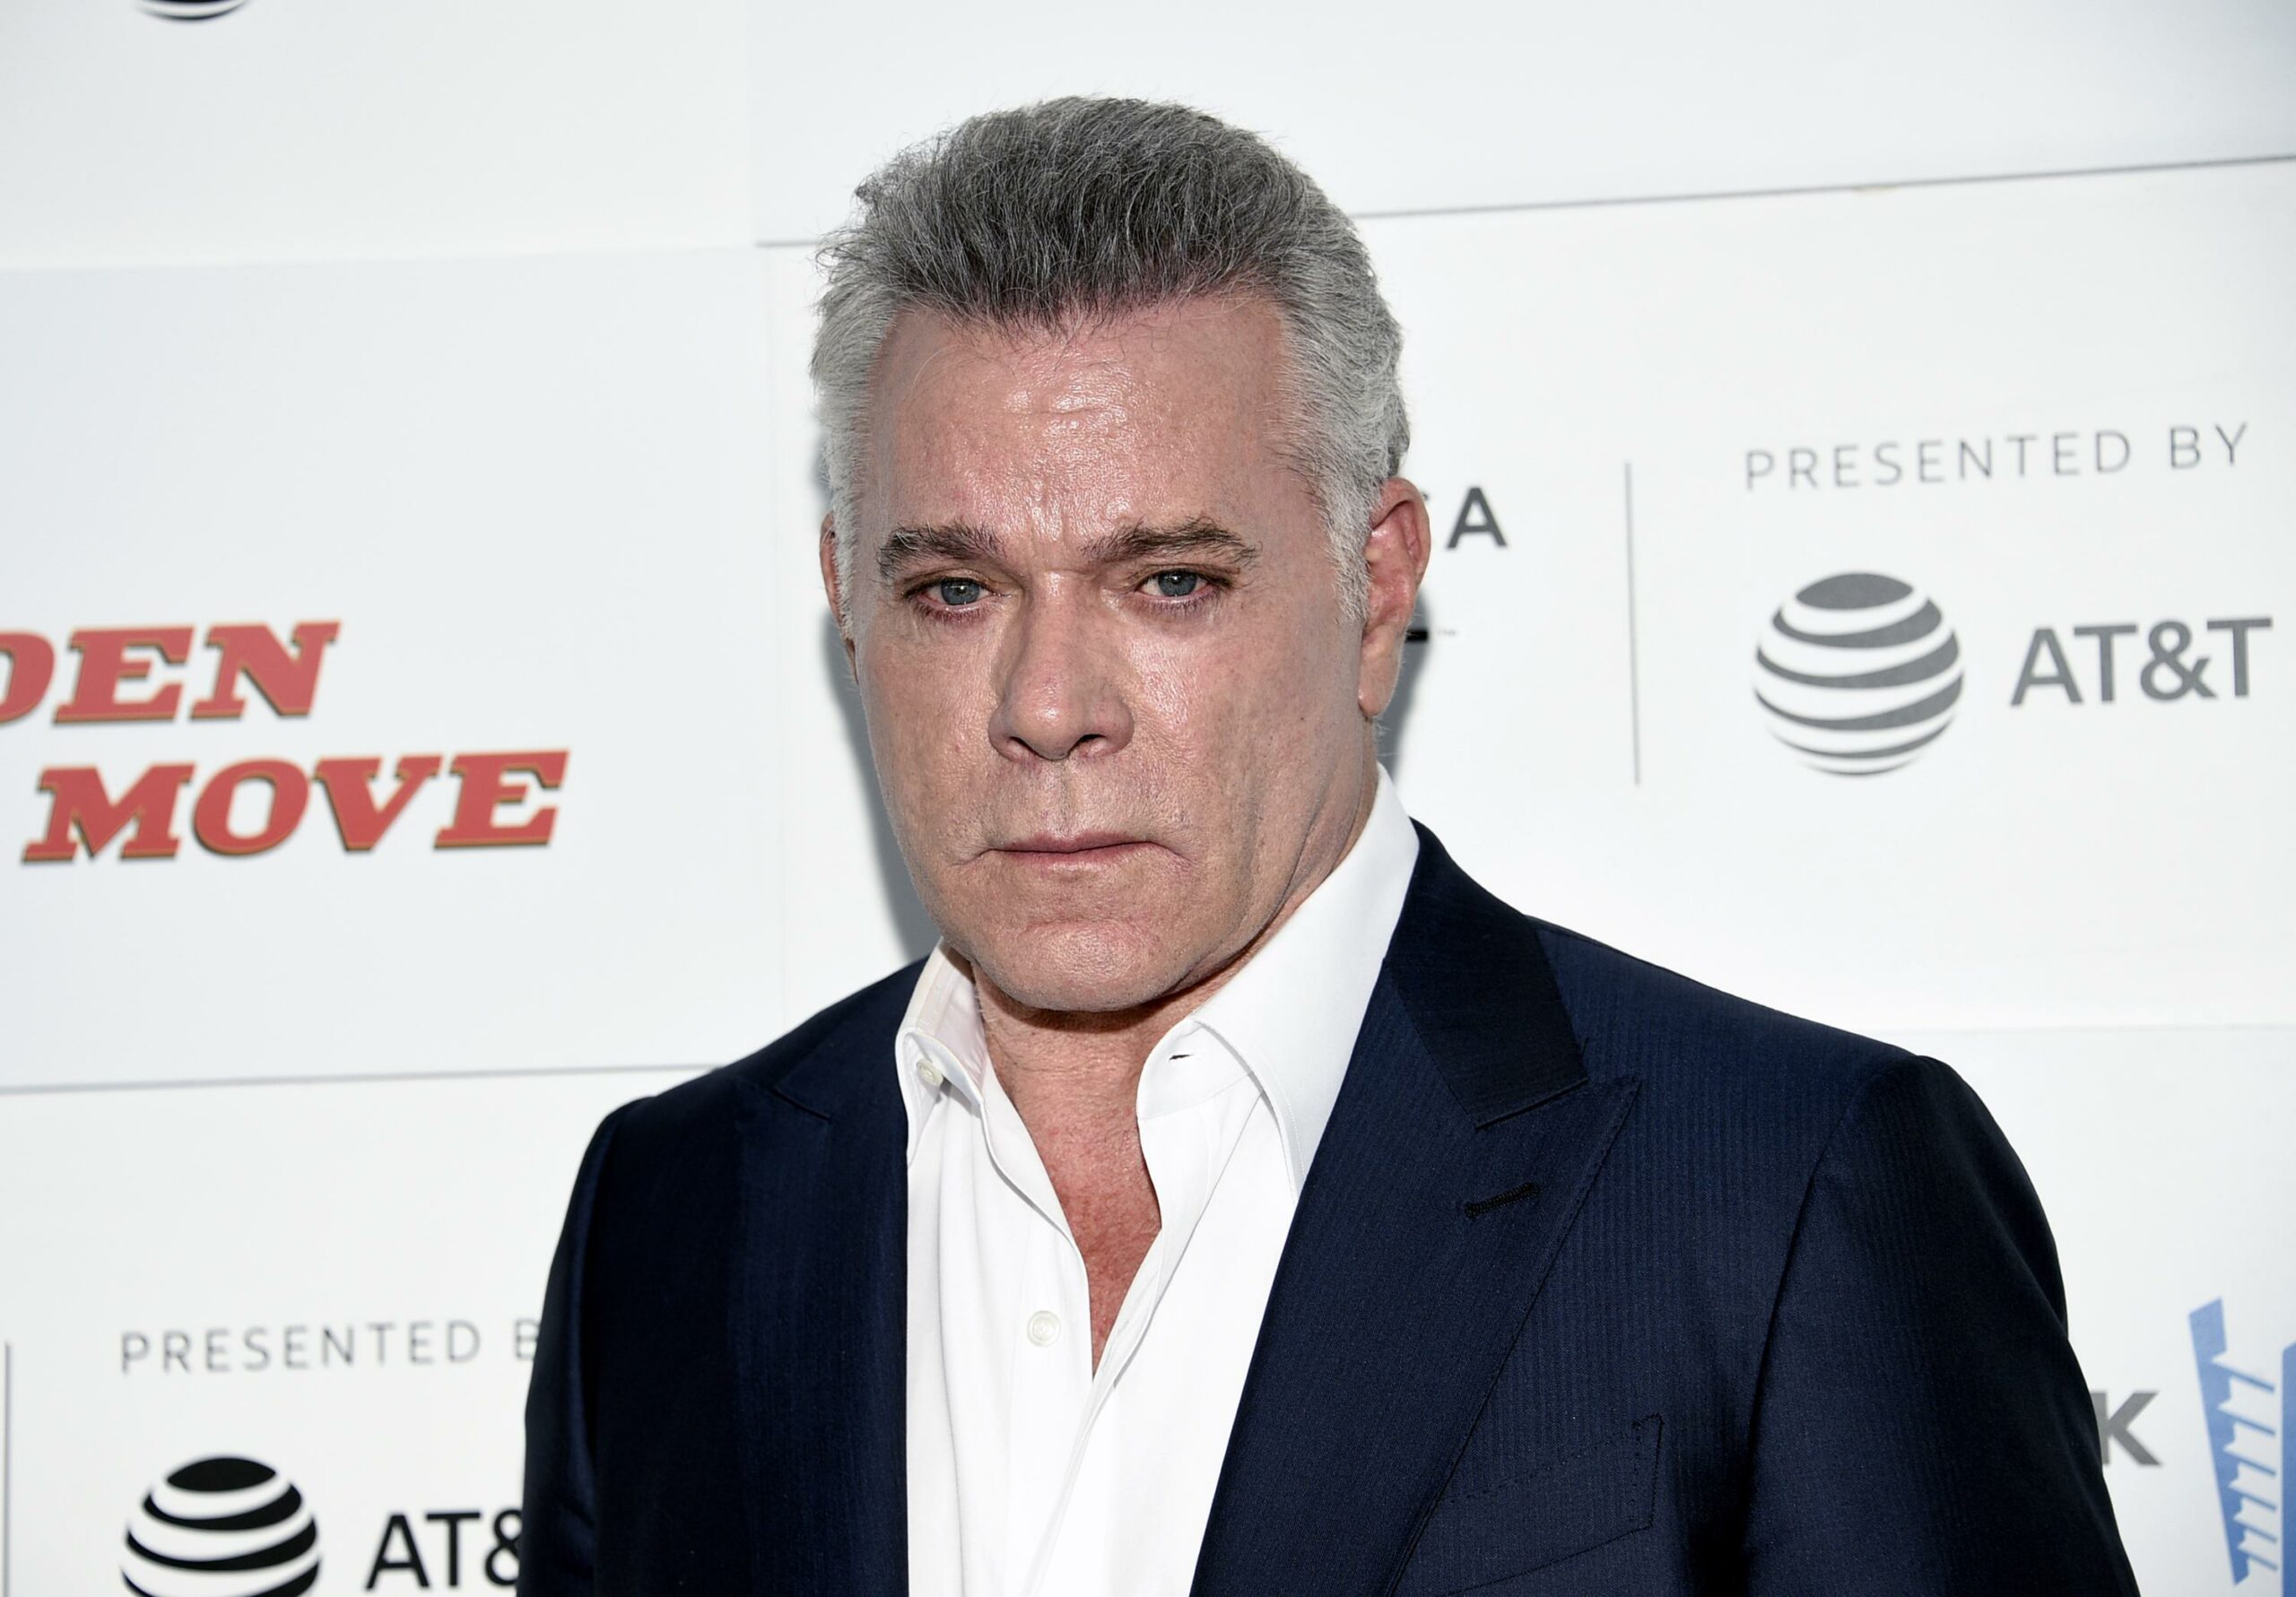 Late Actor Ray Liotta’s Facebook Account Hacked, Death Hoaxes and NSFW Content Posted